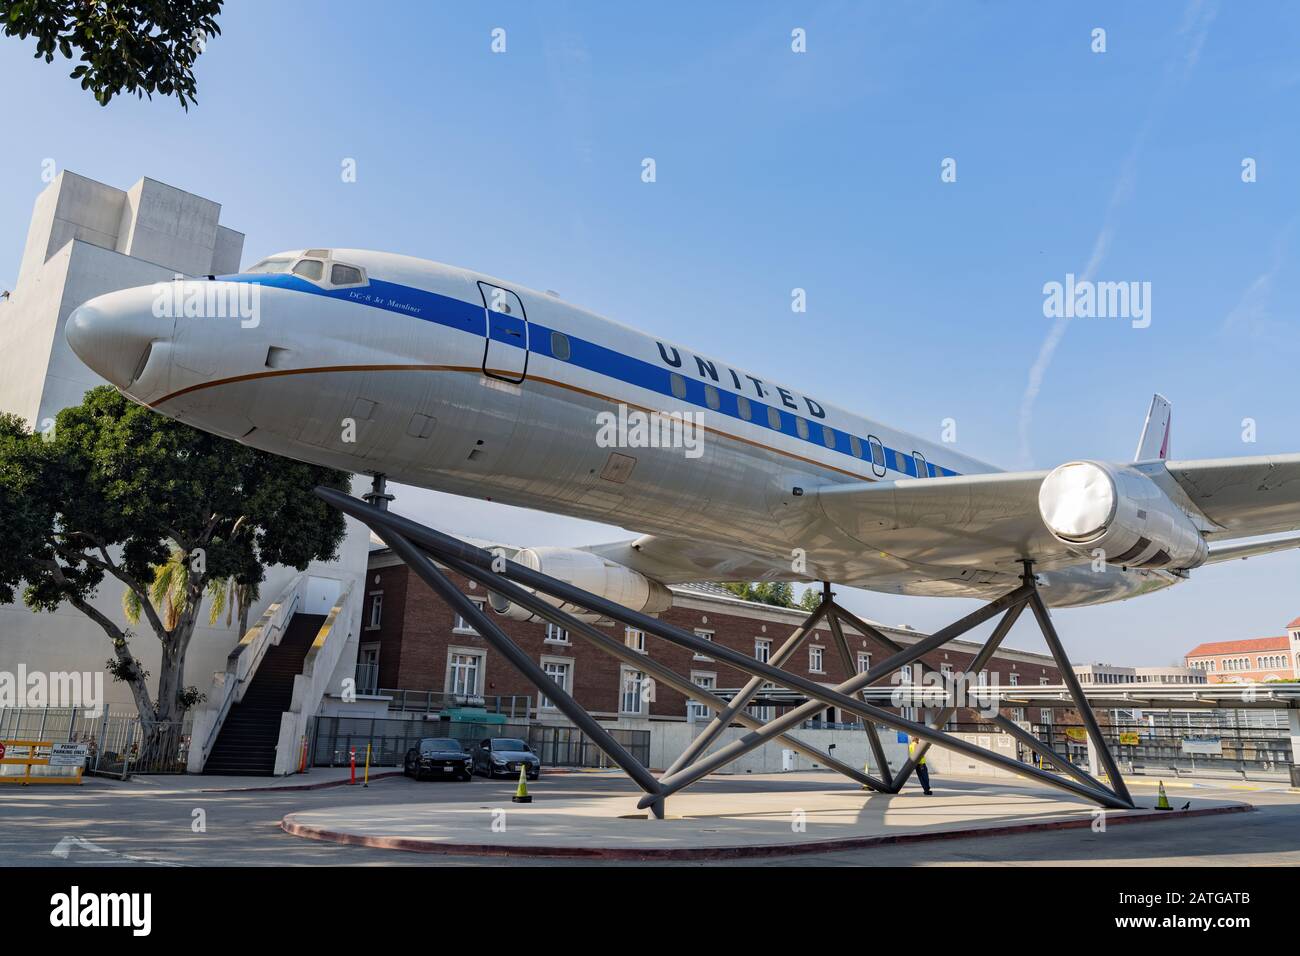 Los Angeles, Jan 15: Afternoon sunny view of the Douglas DC-8 airplane on JAN 15, 2020 at Los Angeles, California Stock Photo